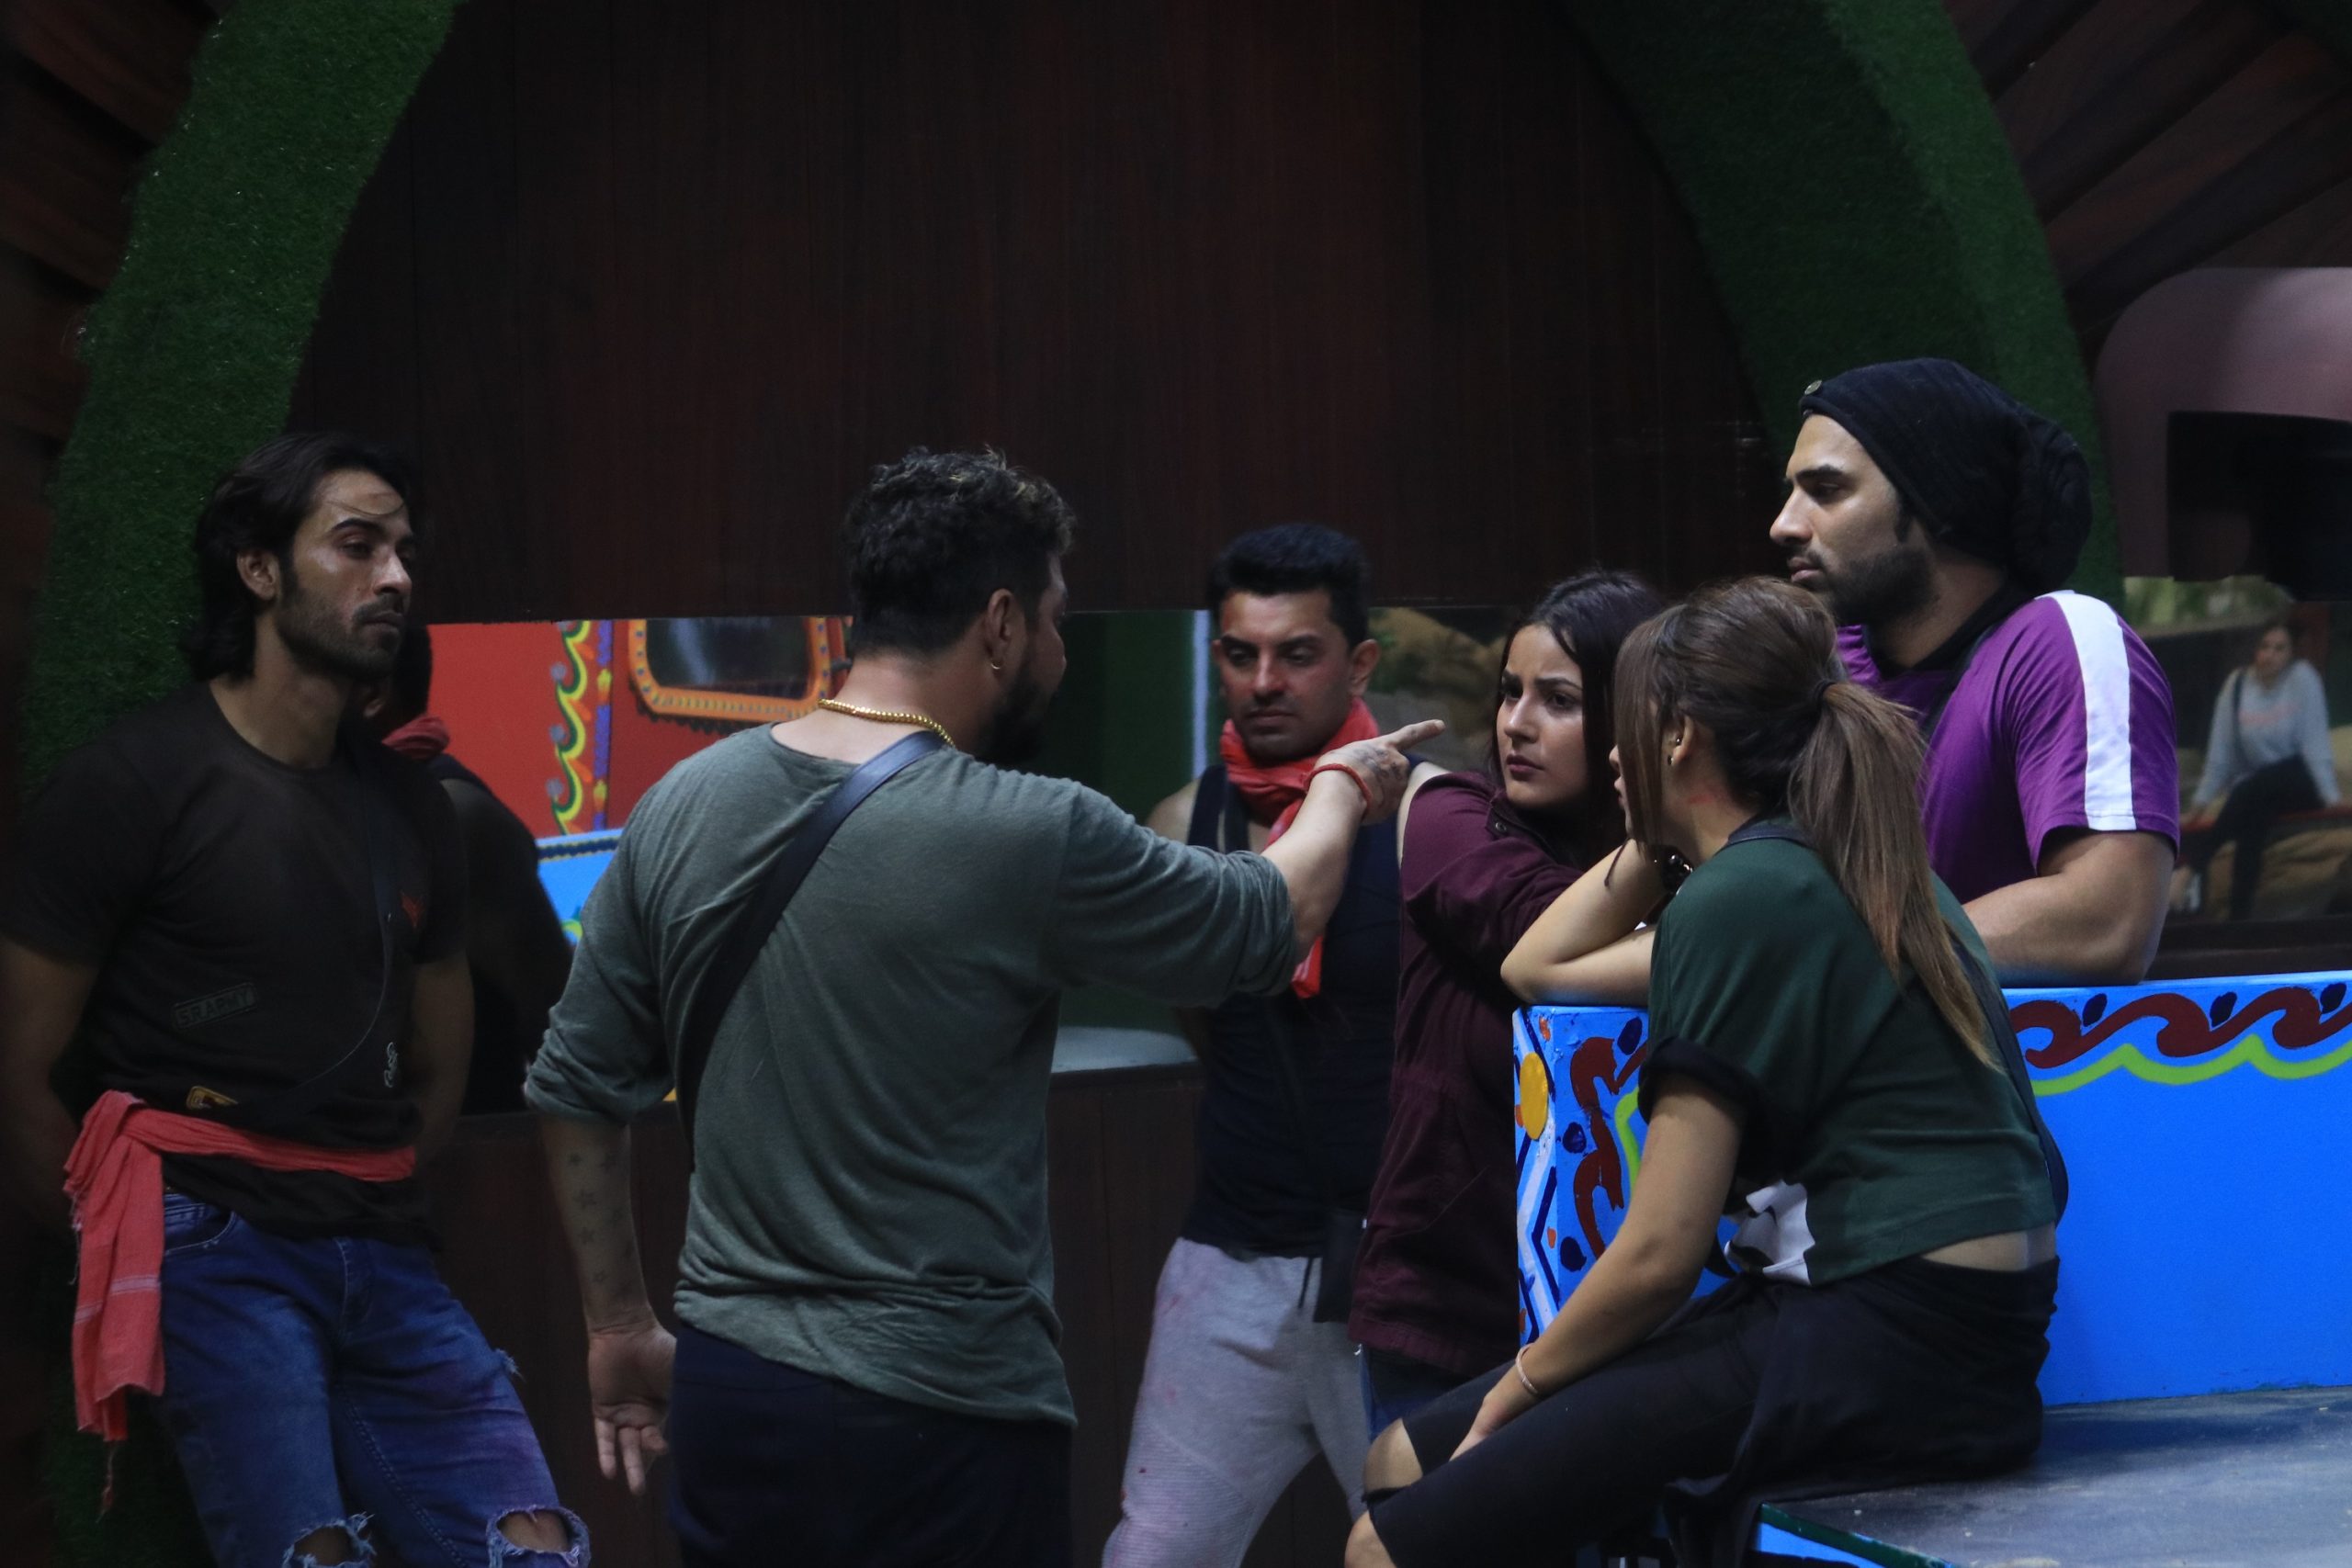 Bigg Boss transport services task takes an ugly turn